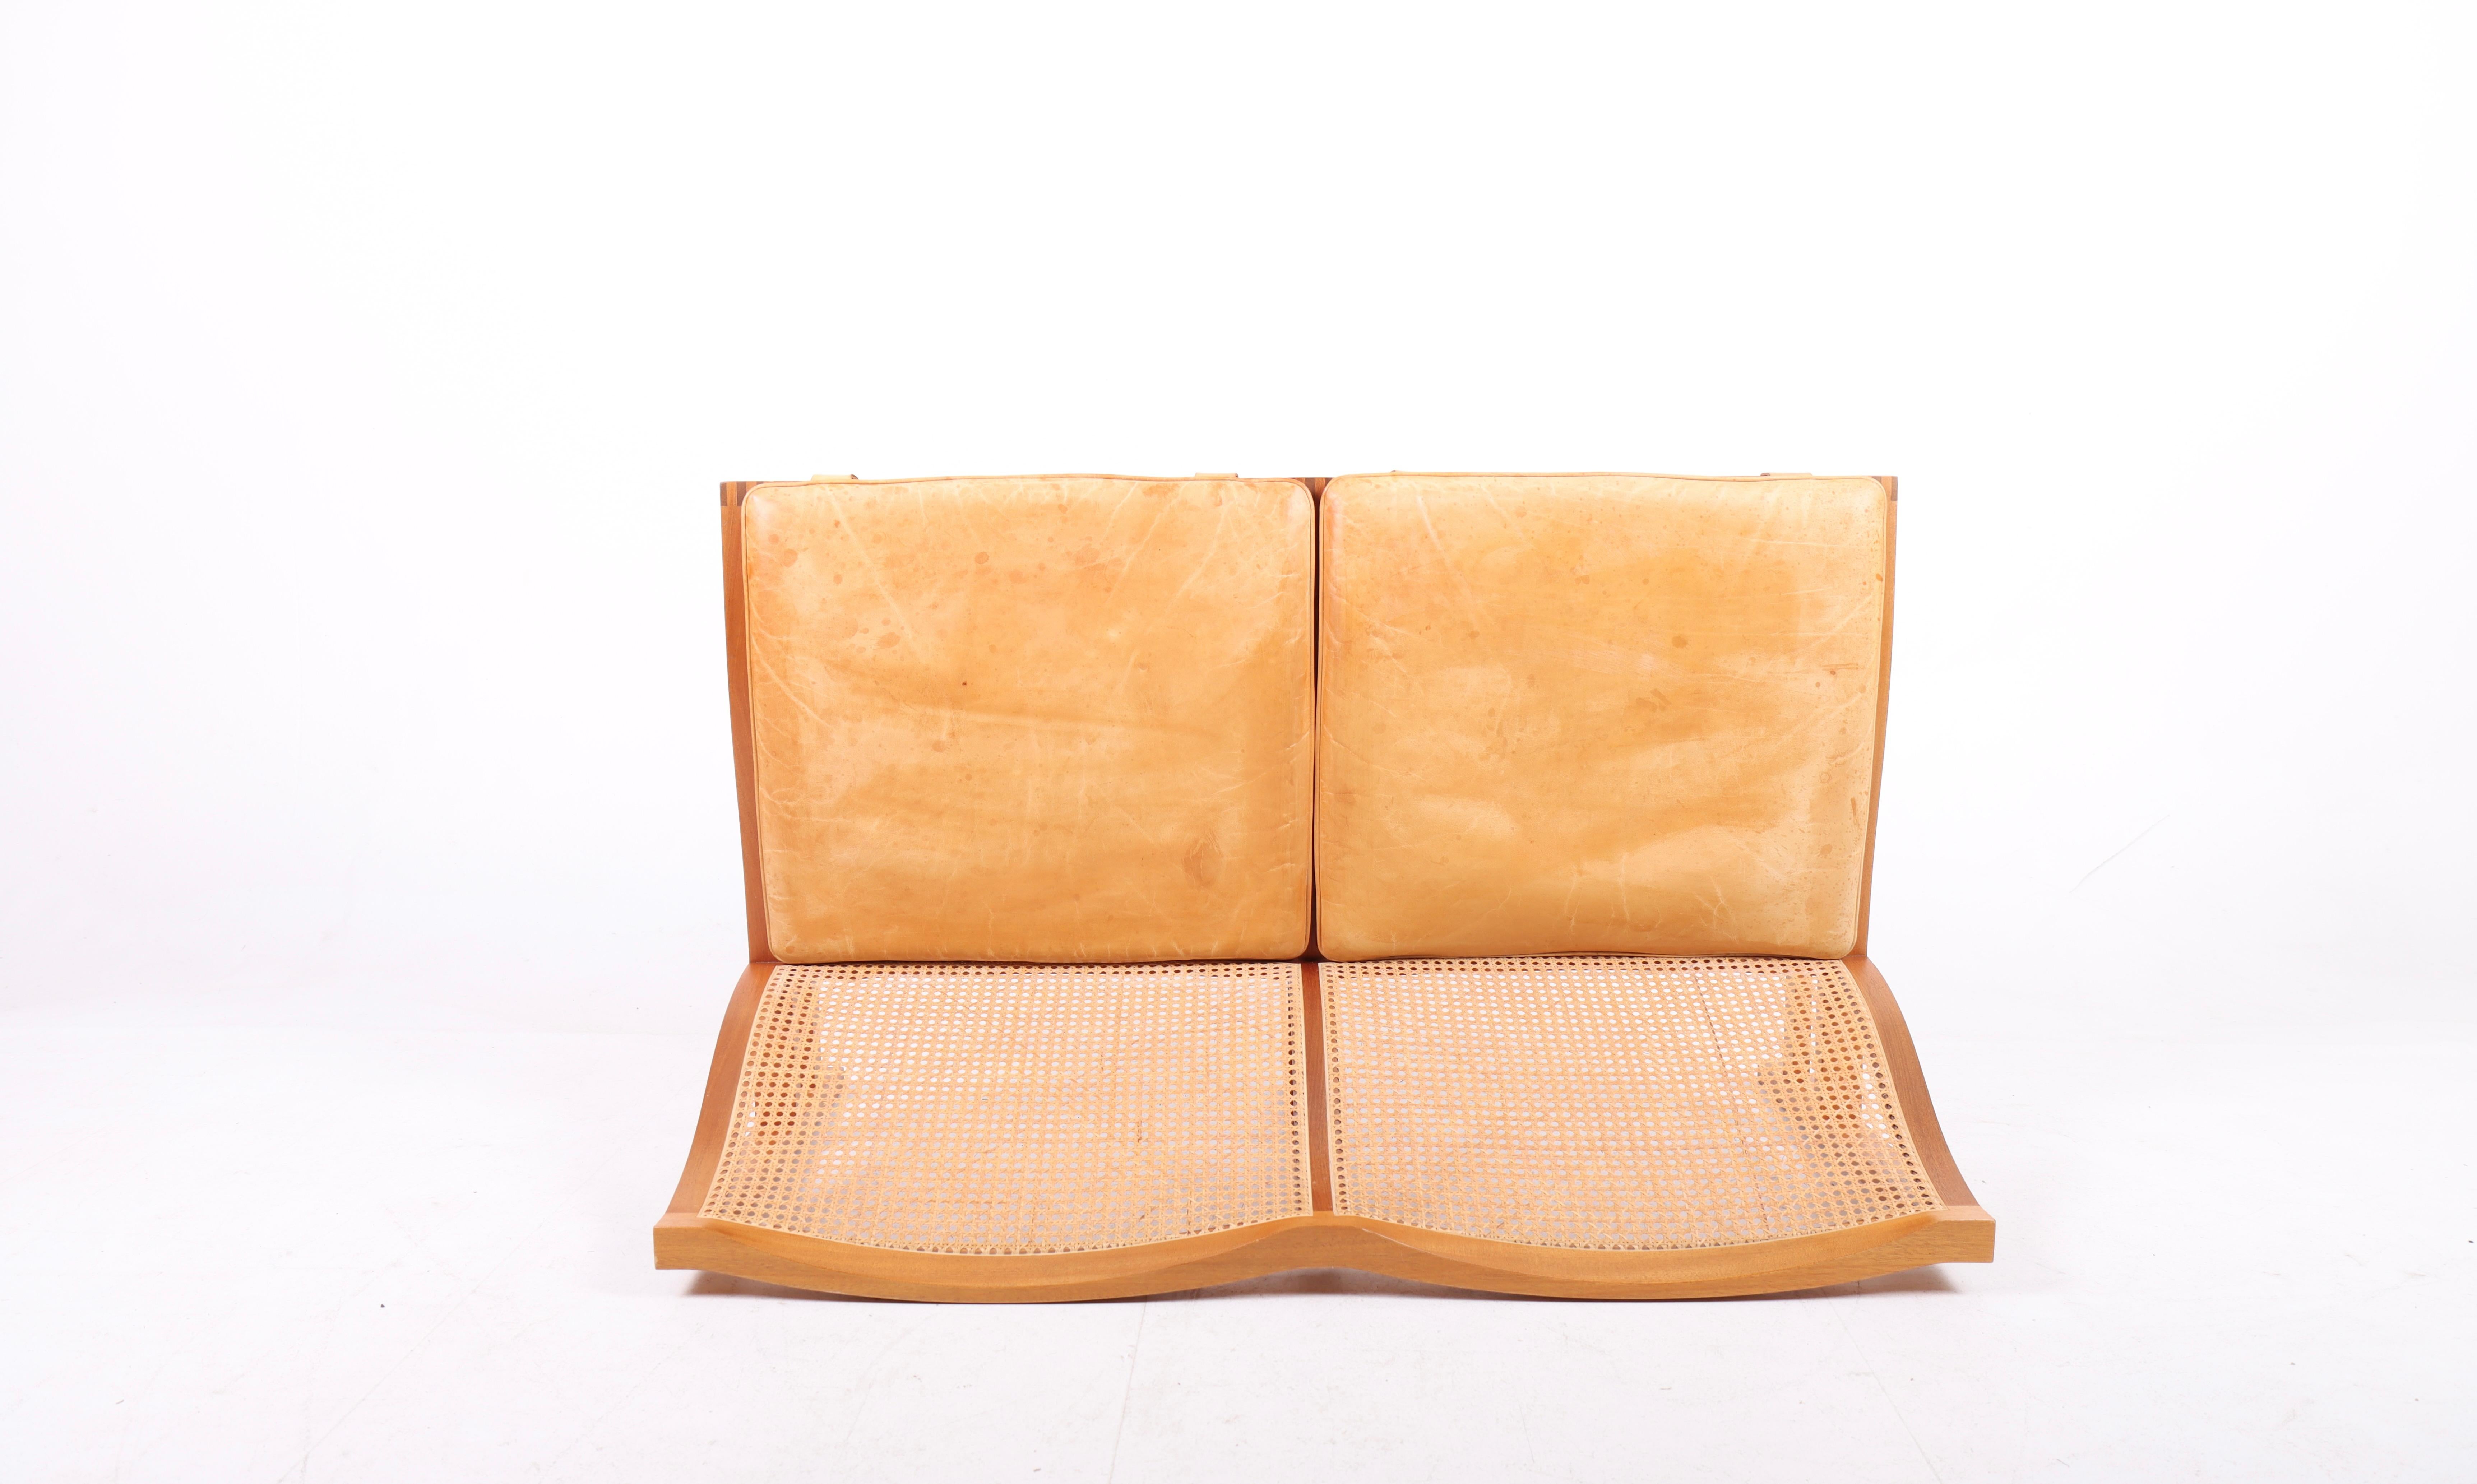 Danish Modern Sofa in Mahogany and Patinated Leather by Rud Thygesen, 1980s For Sale 3